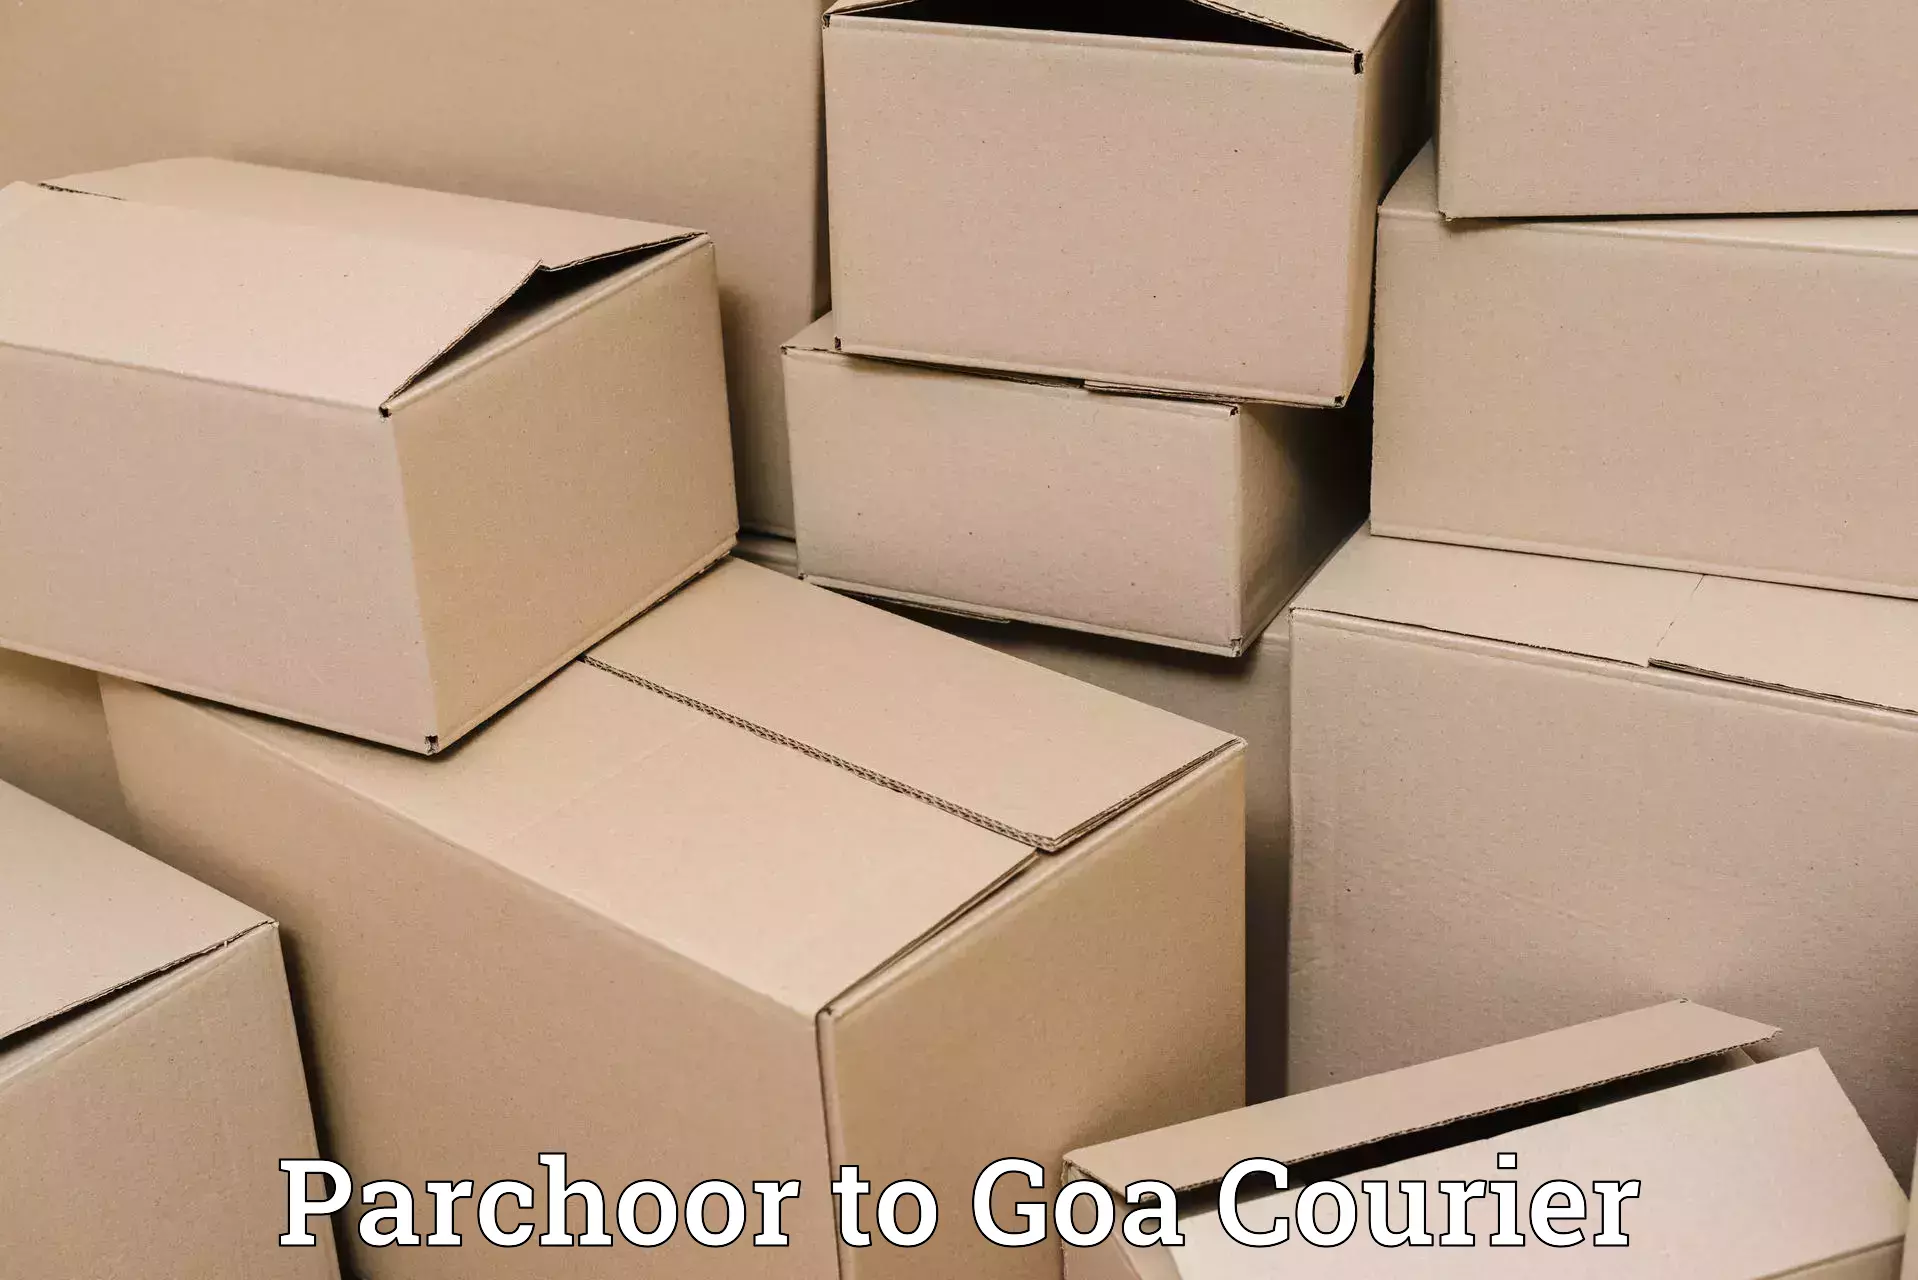 Nationwide shipping services Parchoor to Vasco da Gama